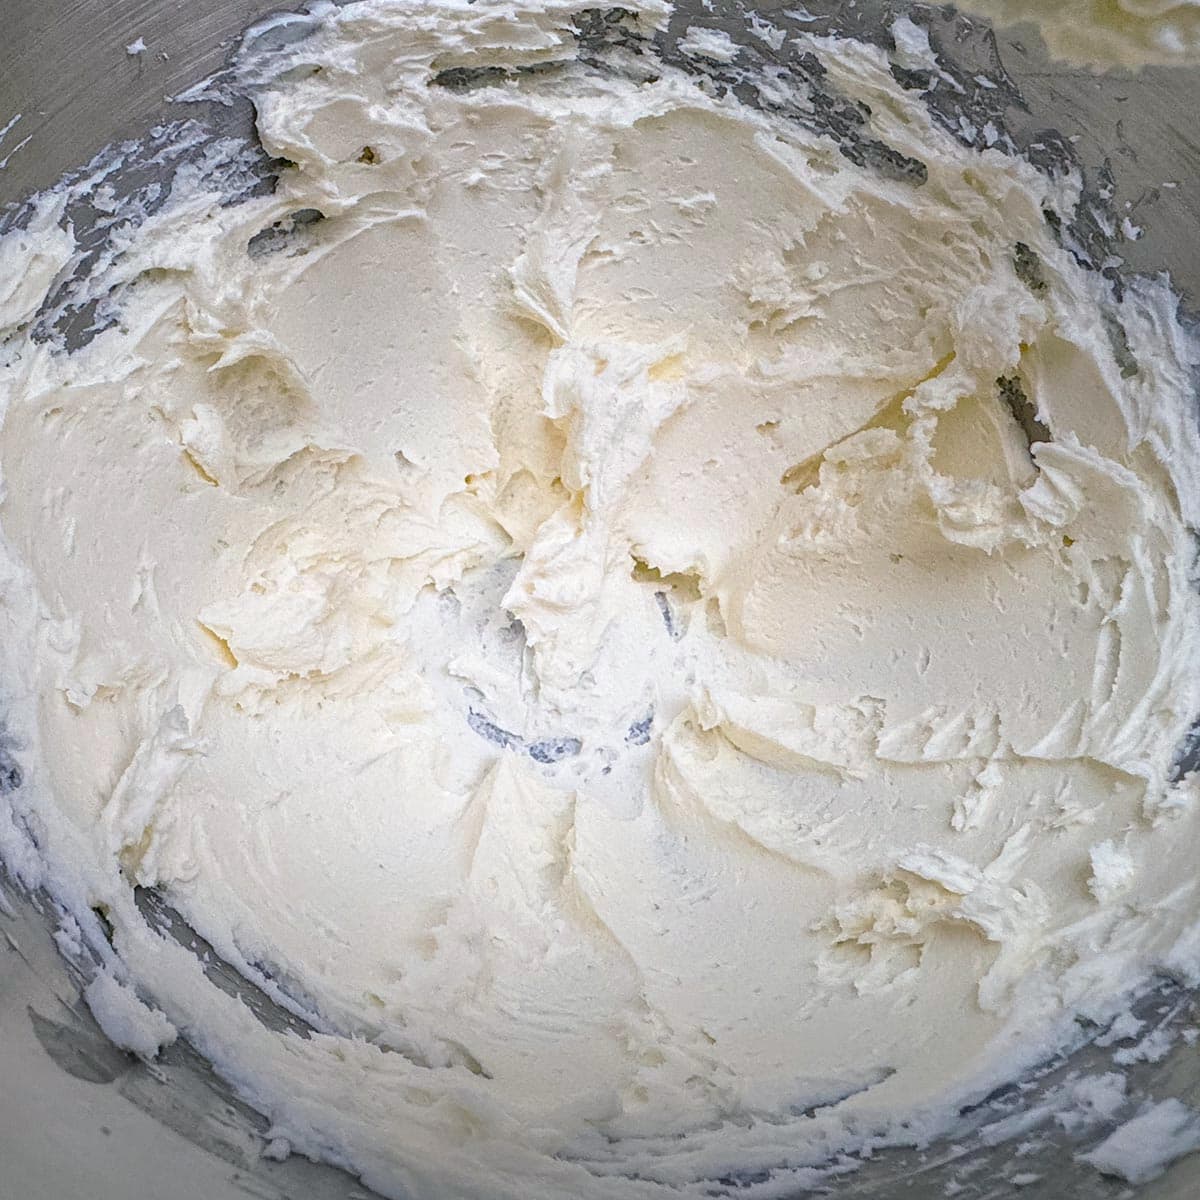 Creaming the butter and cream cheese in a mixer.